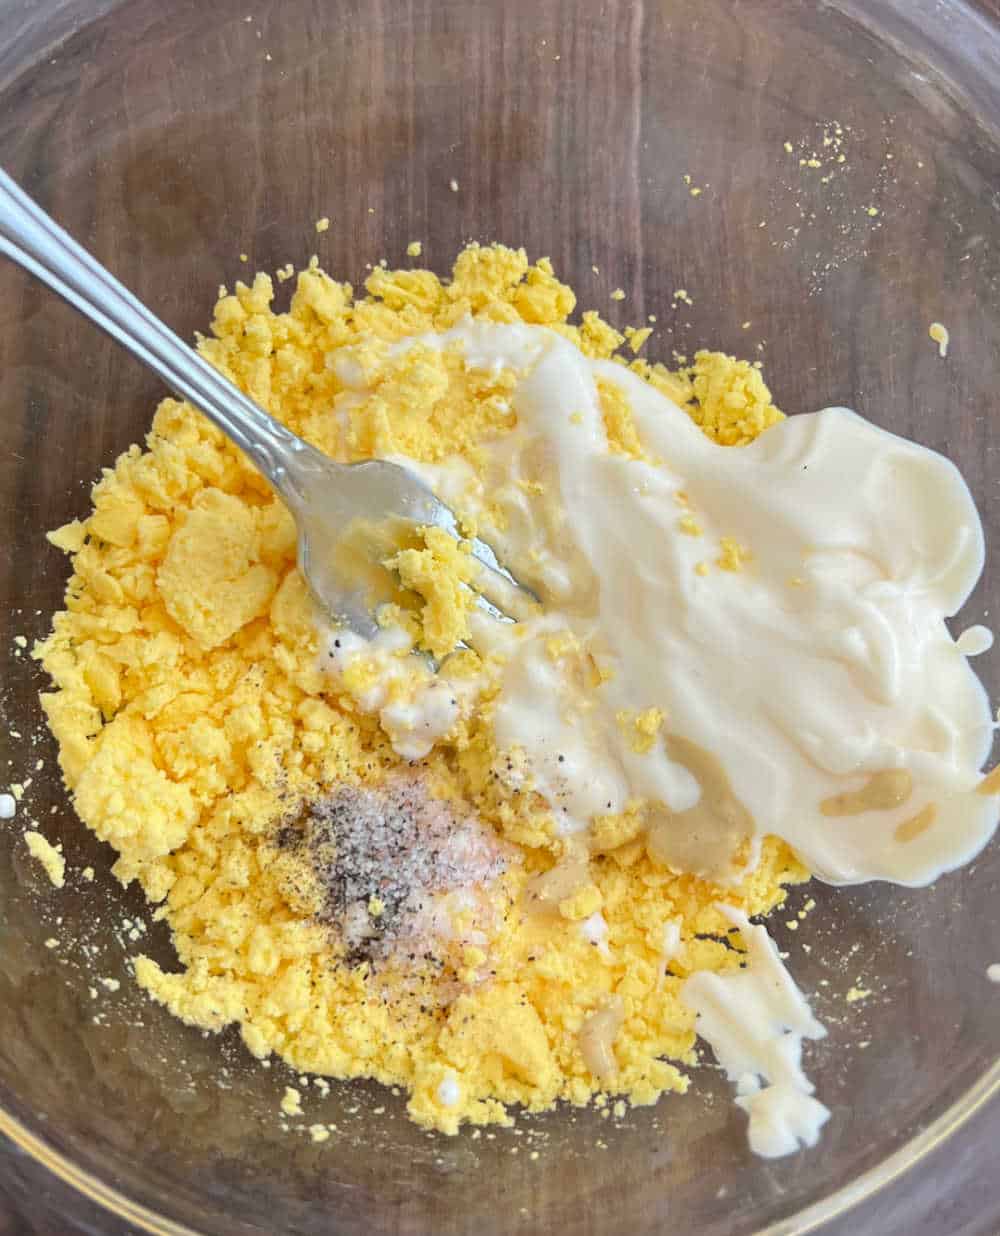 mix yolks with dressing with fork.